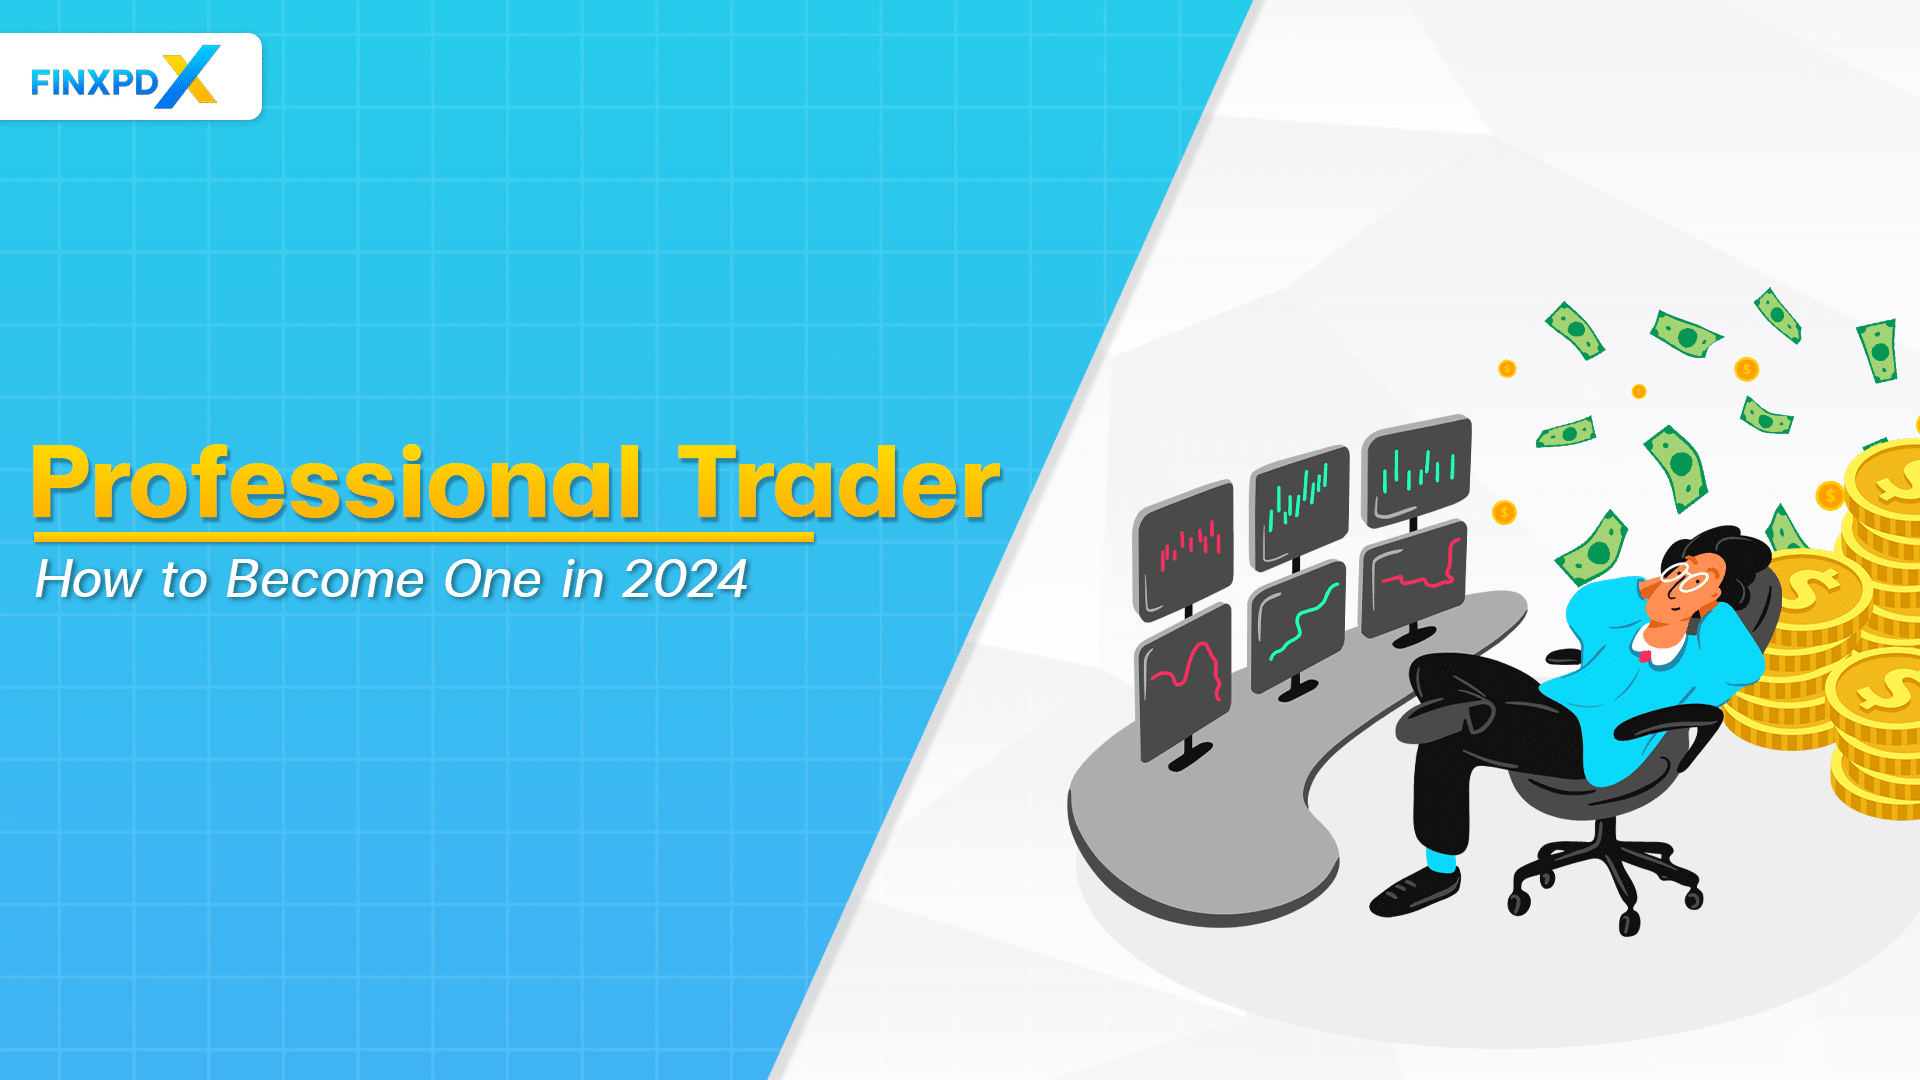 How to Become a Professional Trader in 2024